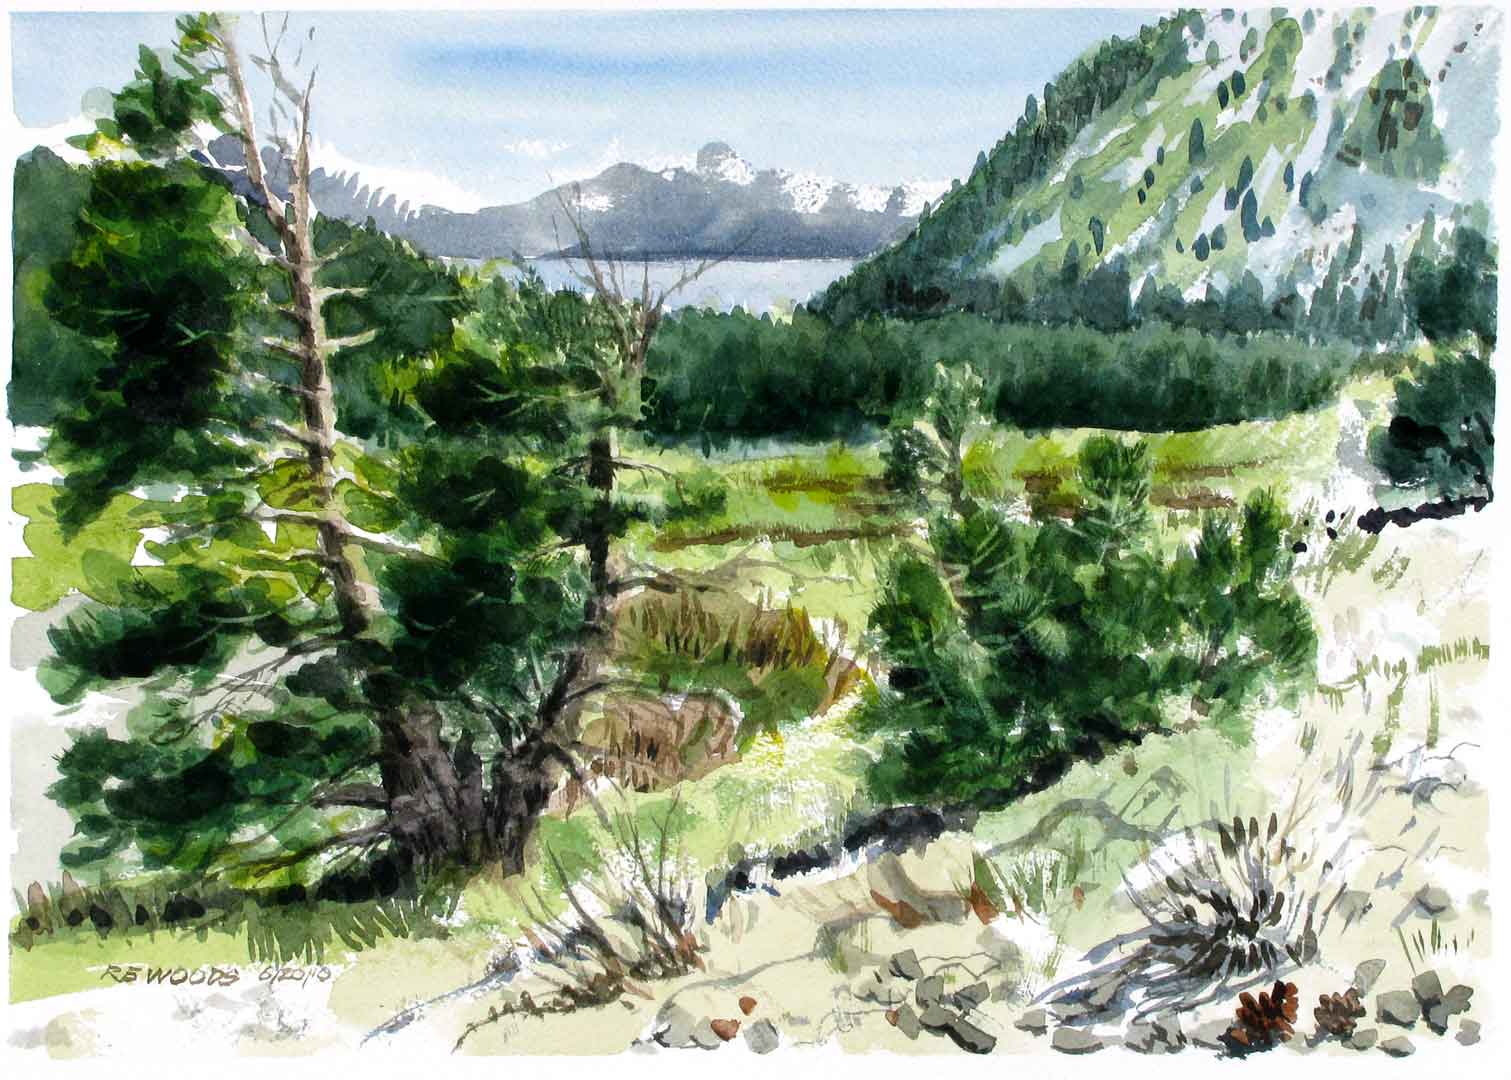 Tahoe Meadows Plein Aire, Watercolor on paper, 13.5 x 10.5